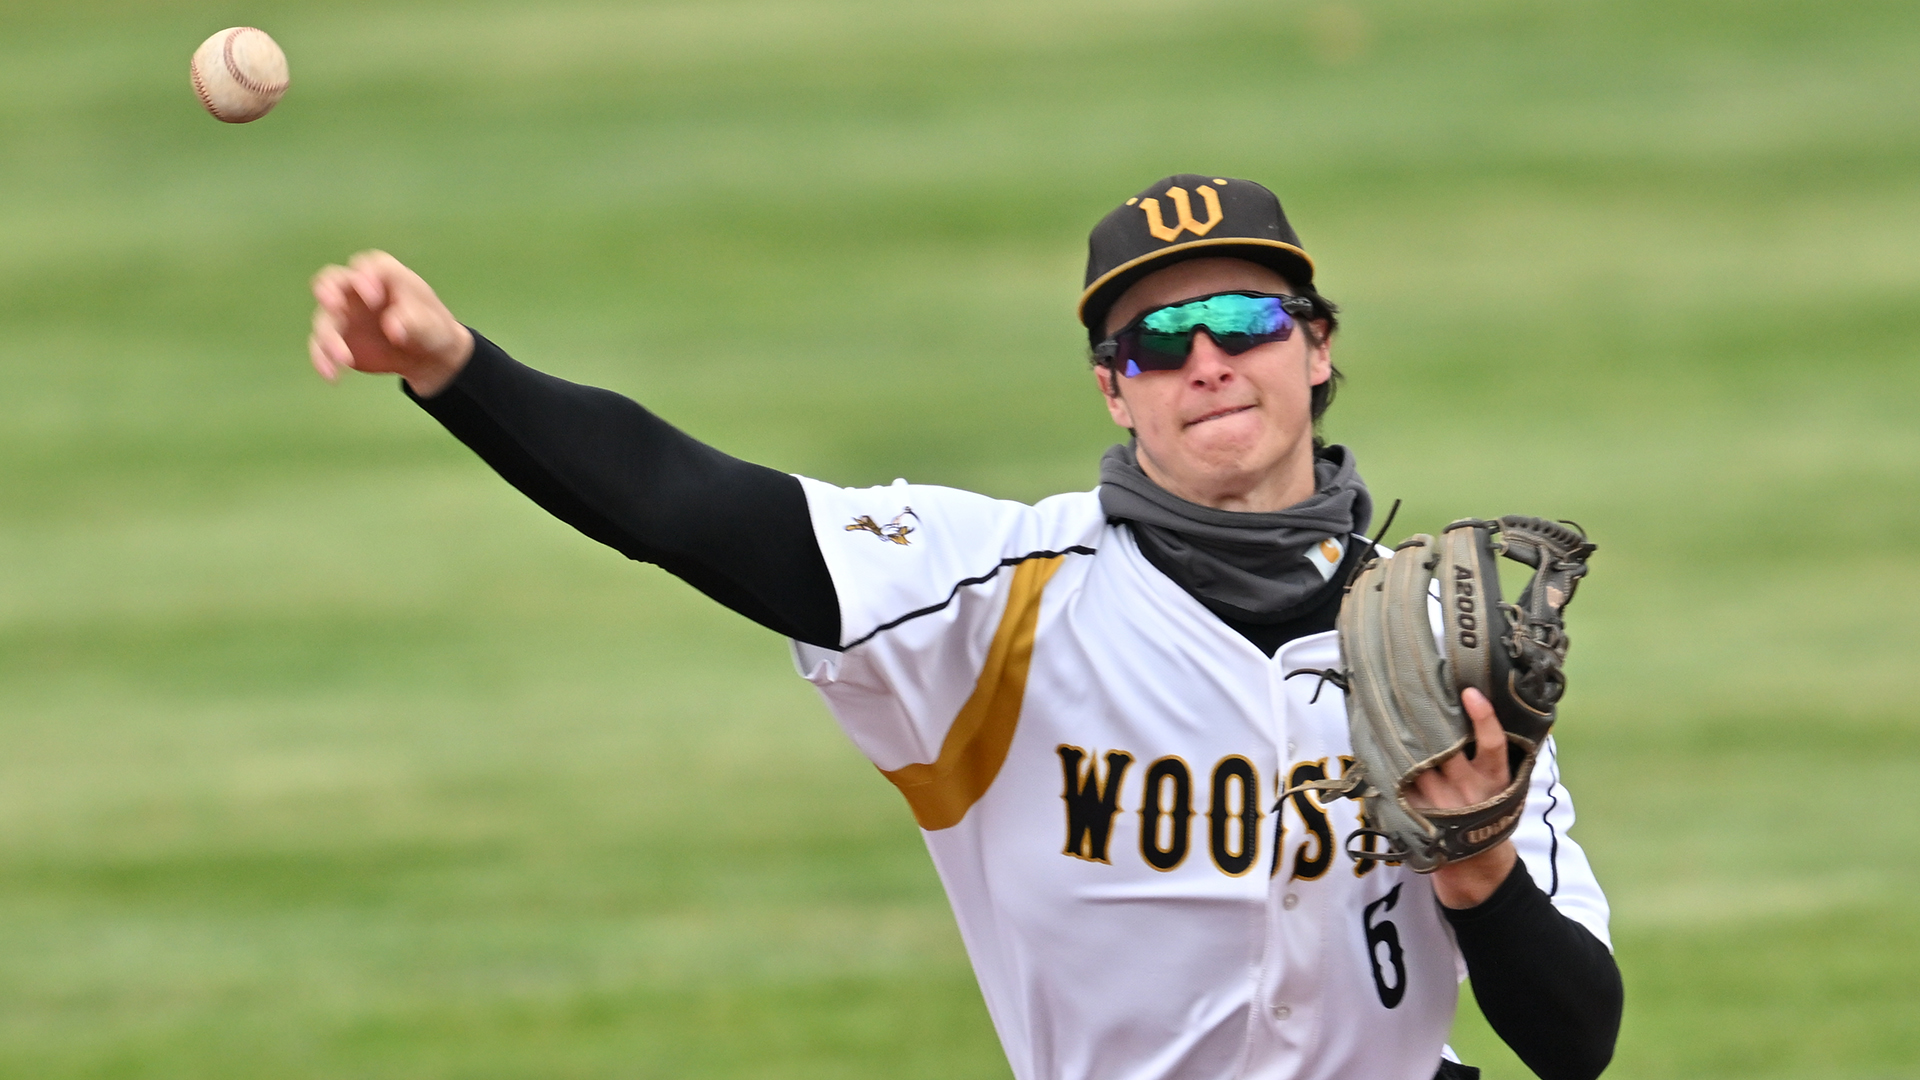 Grant Mitchell, Wooster baseball